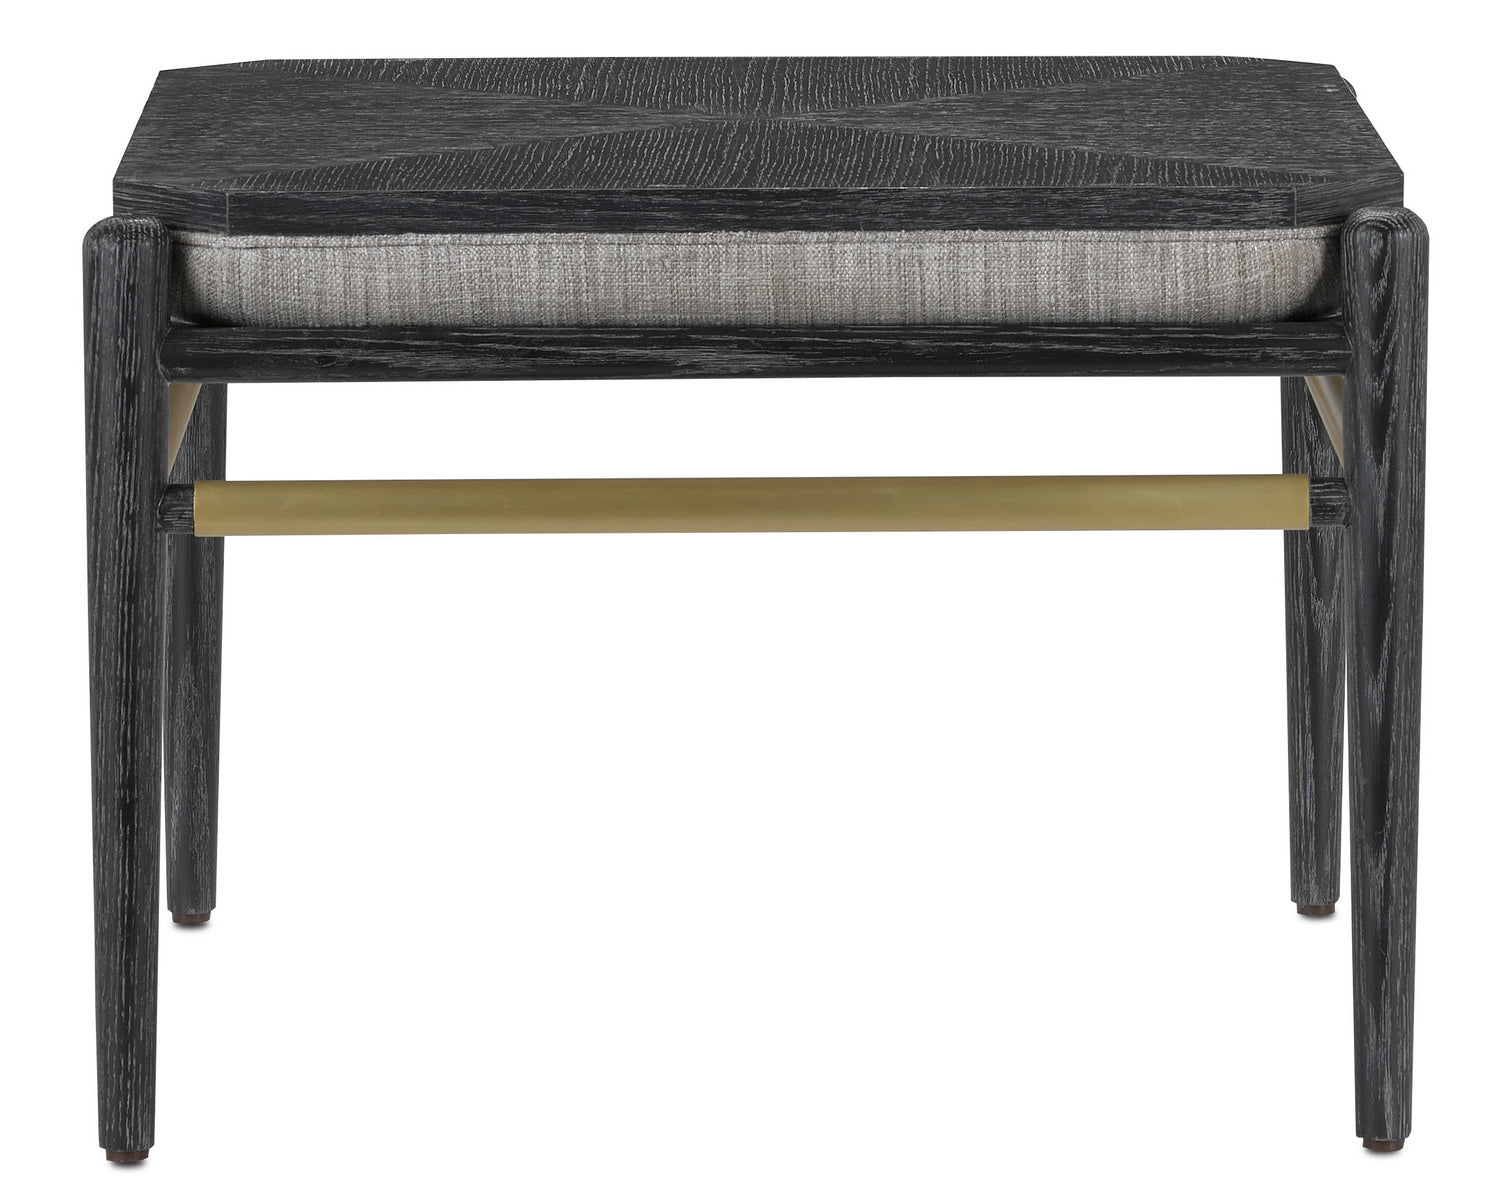 Ottoman from the Visby collection in Cerused Black/Brushed Brass finish